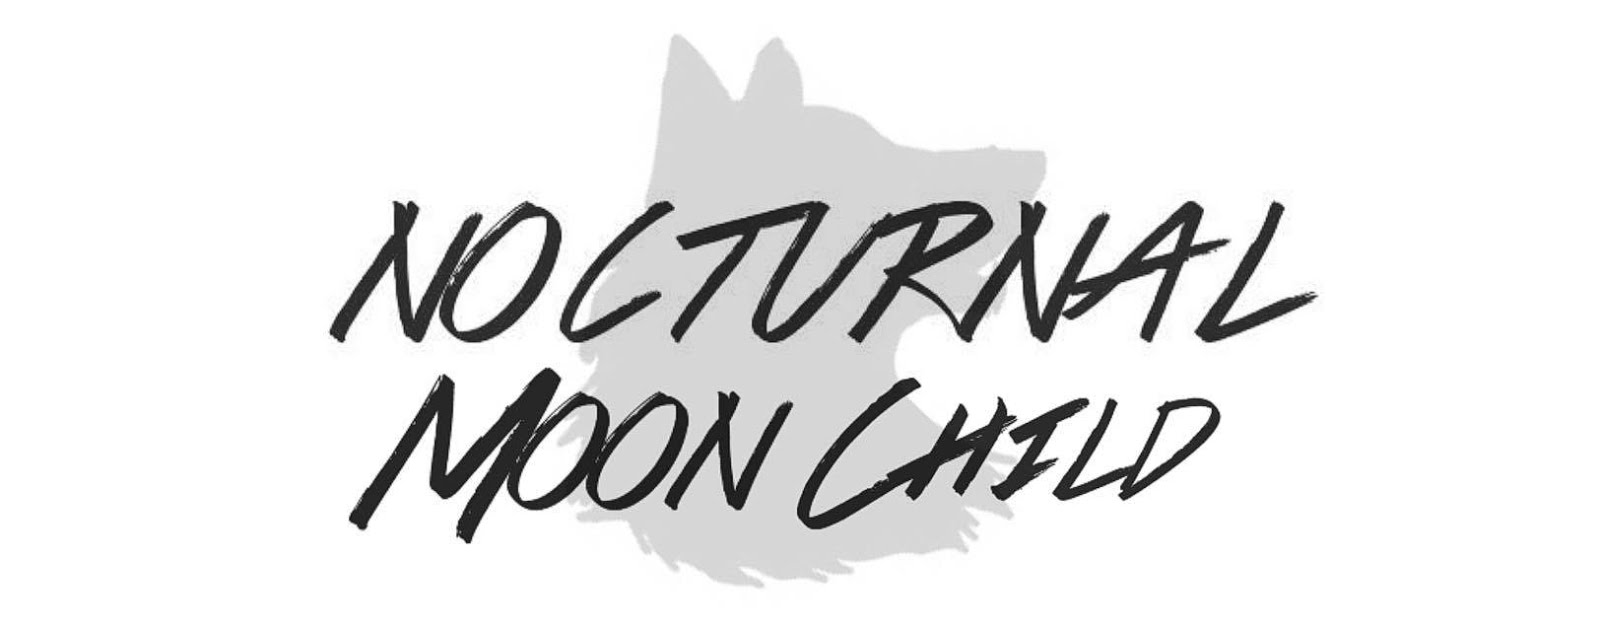 nocturnal moon child